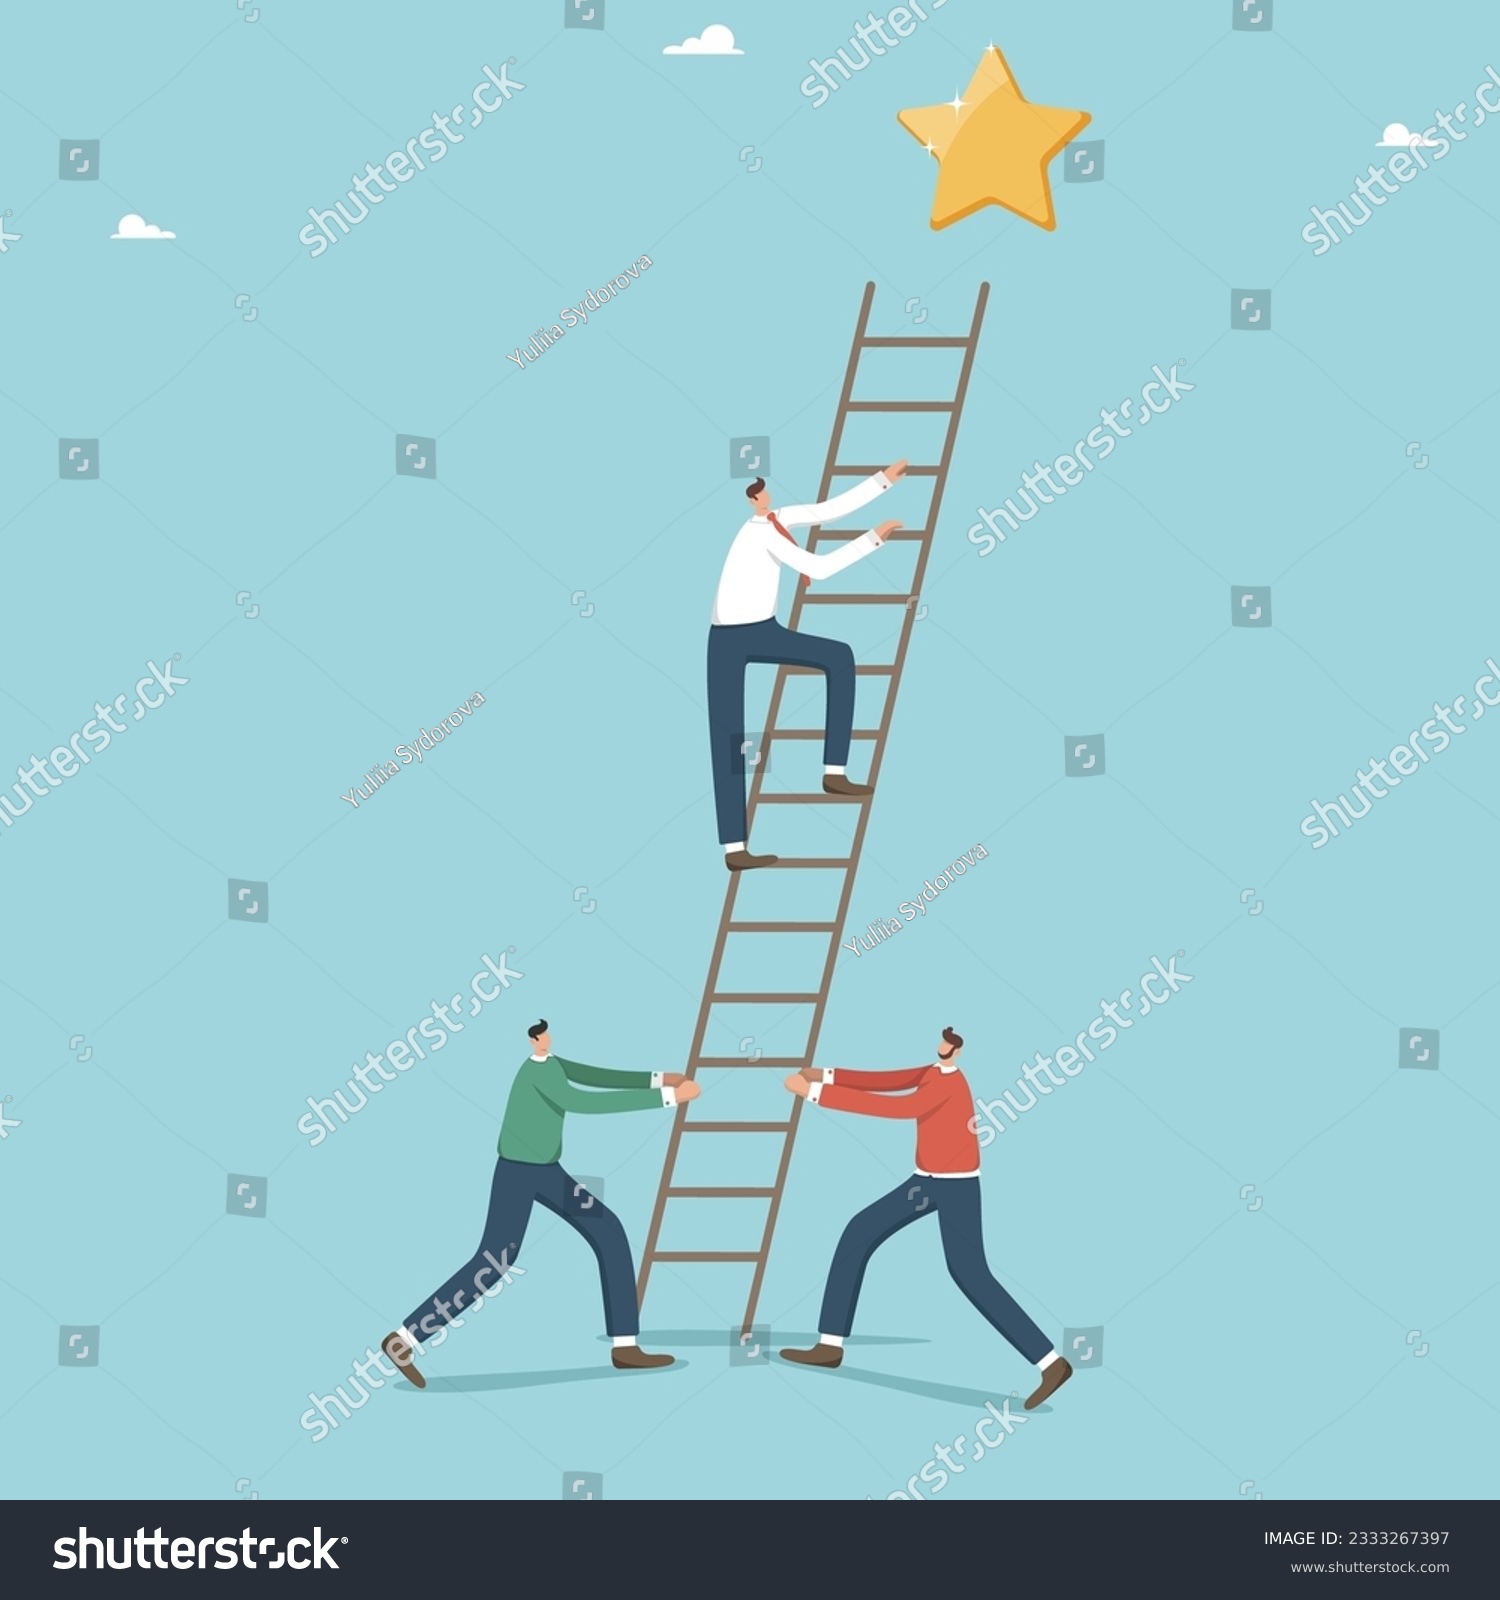 SVG of Help and cooperation to achieve goals and success, teamwork for highest result in work, brainstorming to create business ideas or strategies, men hold a ladder while their friend climbs up to star. svg